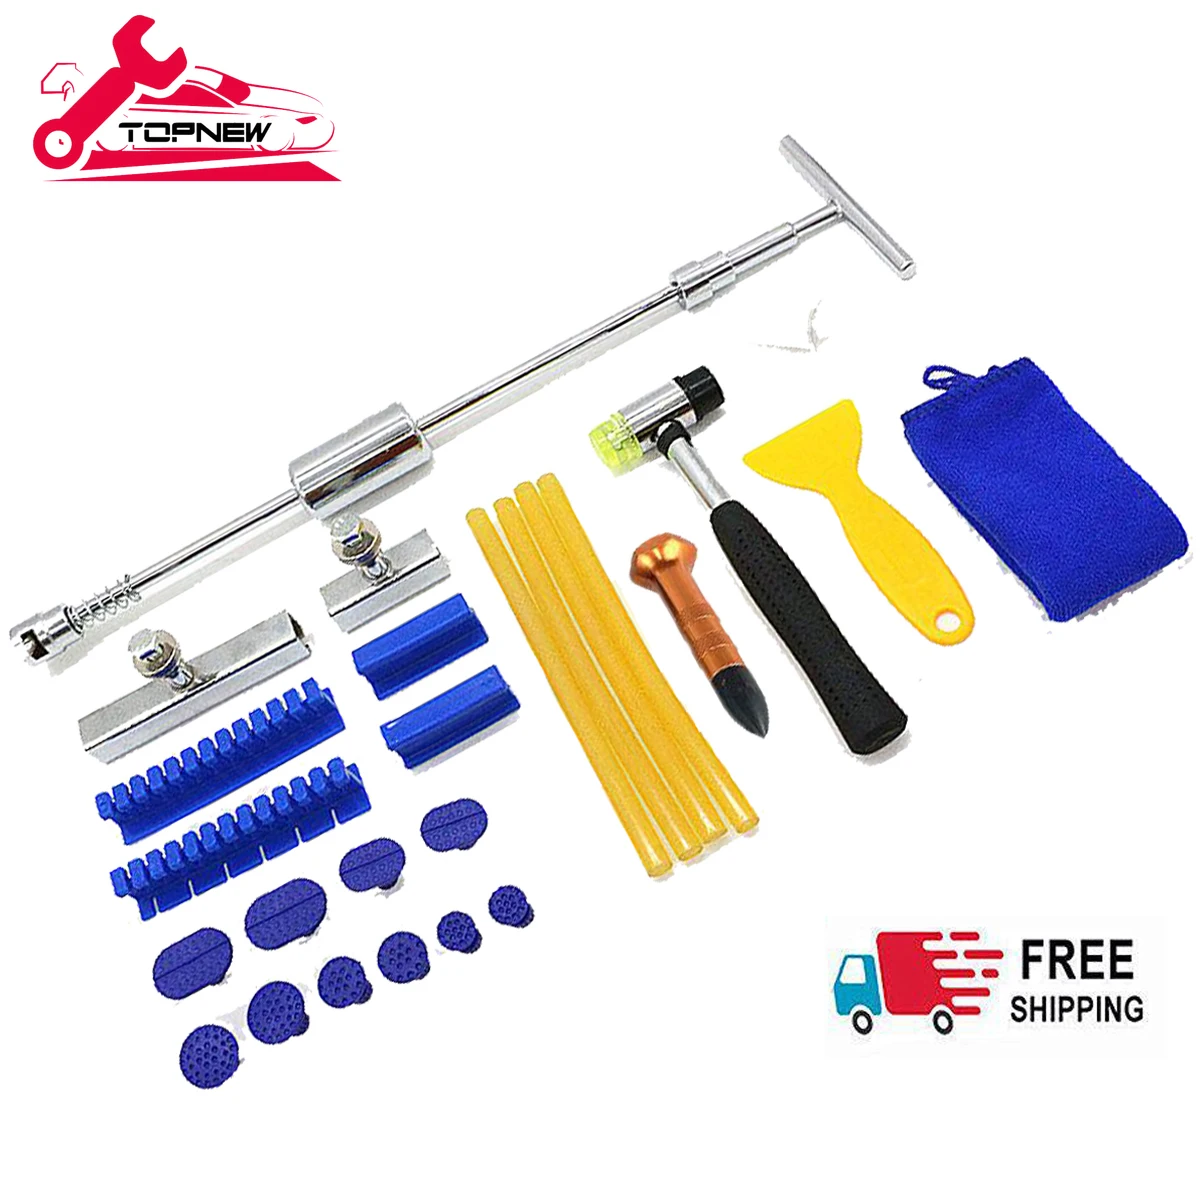 Auto Paintless Dent Repair Tool with 38cm Slide Hammer T Bar Dent Puller for Car Body Hail Dent Removal Car Repair Tools